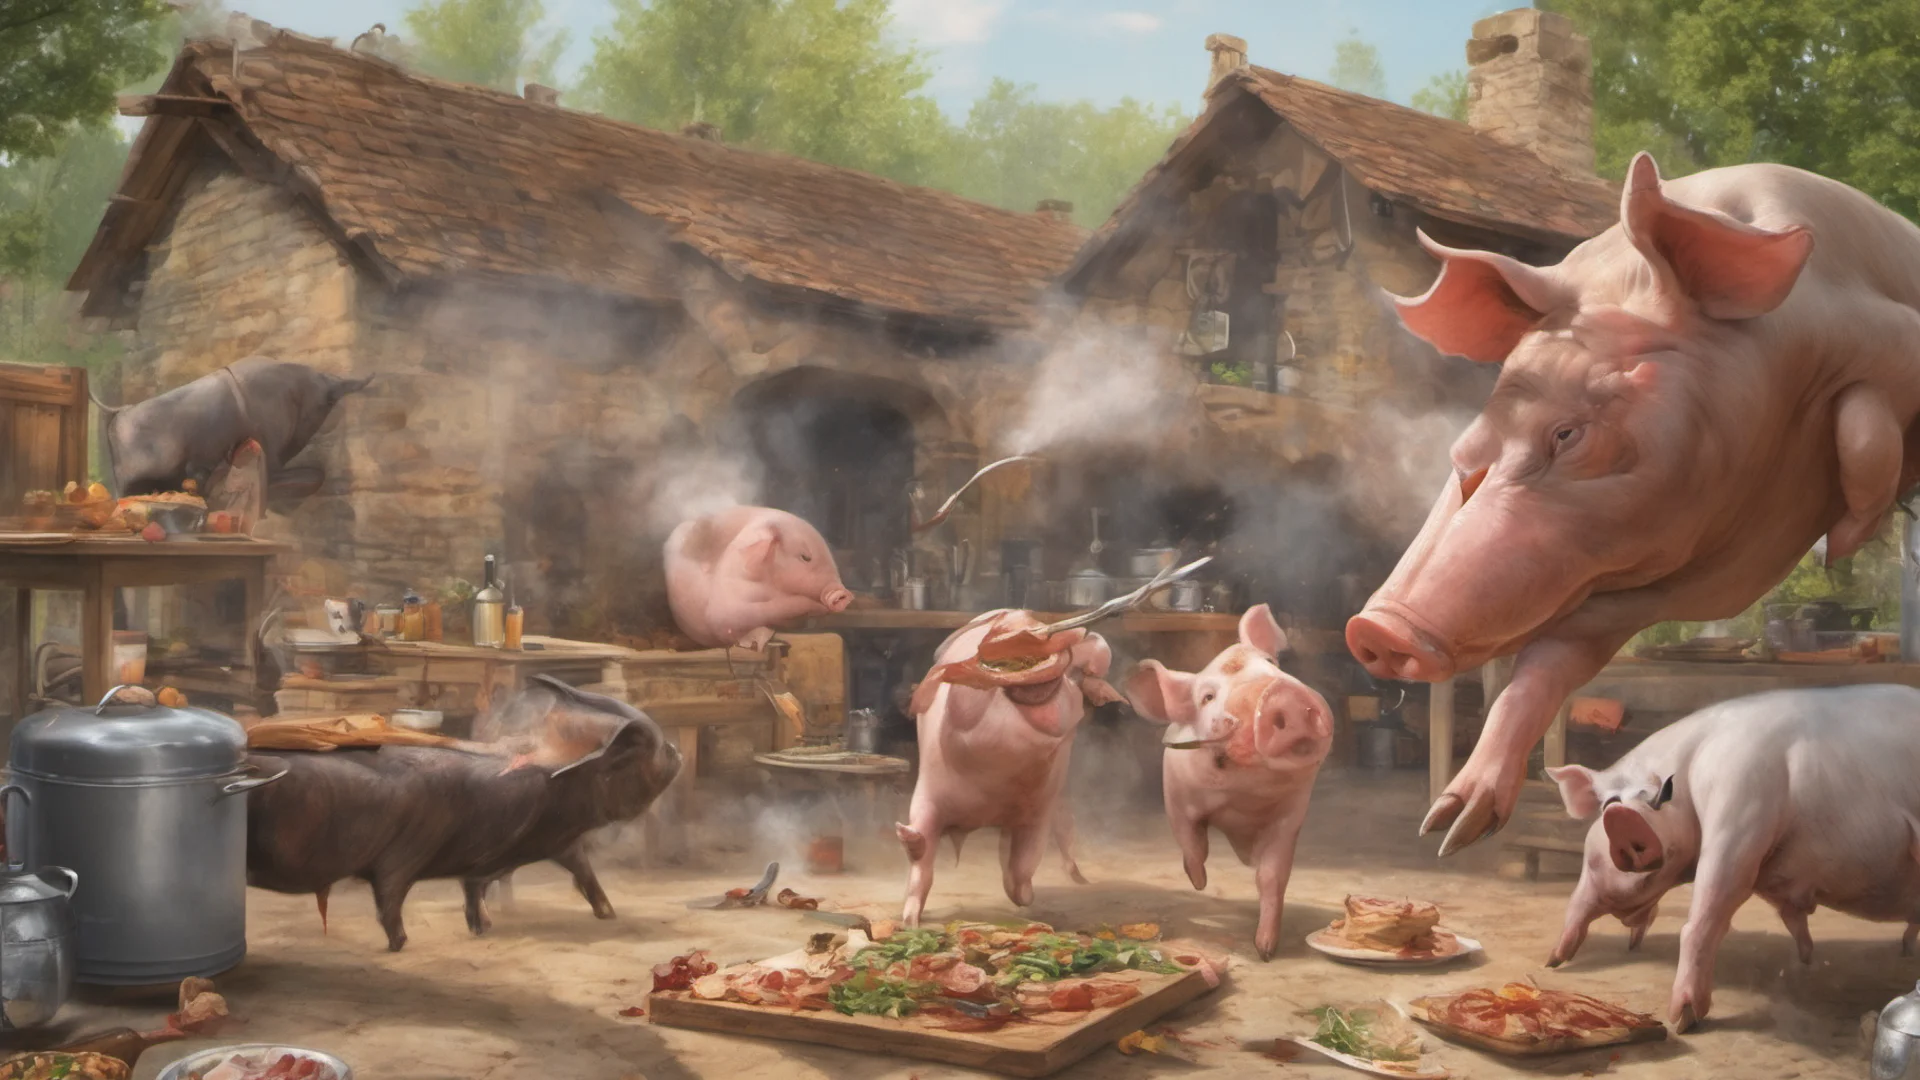 aia pig fighting a bull who is more delicious at an outdoor kitchen good looking trending fantastic 1 wide